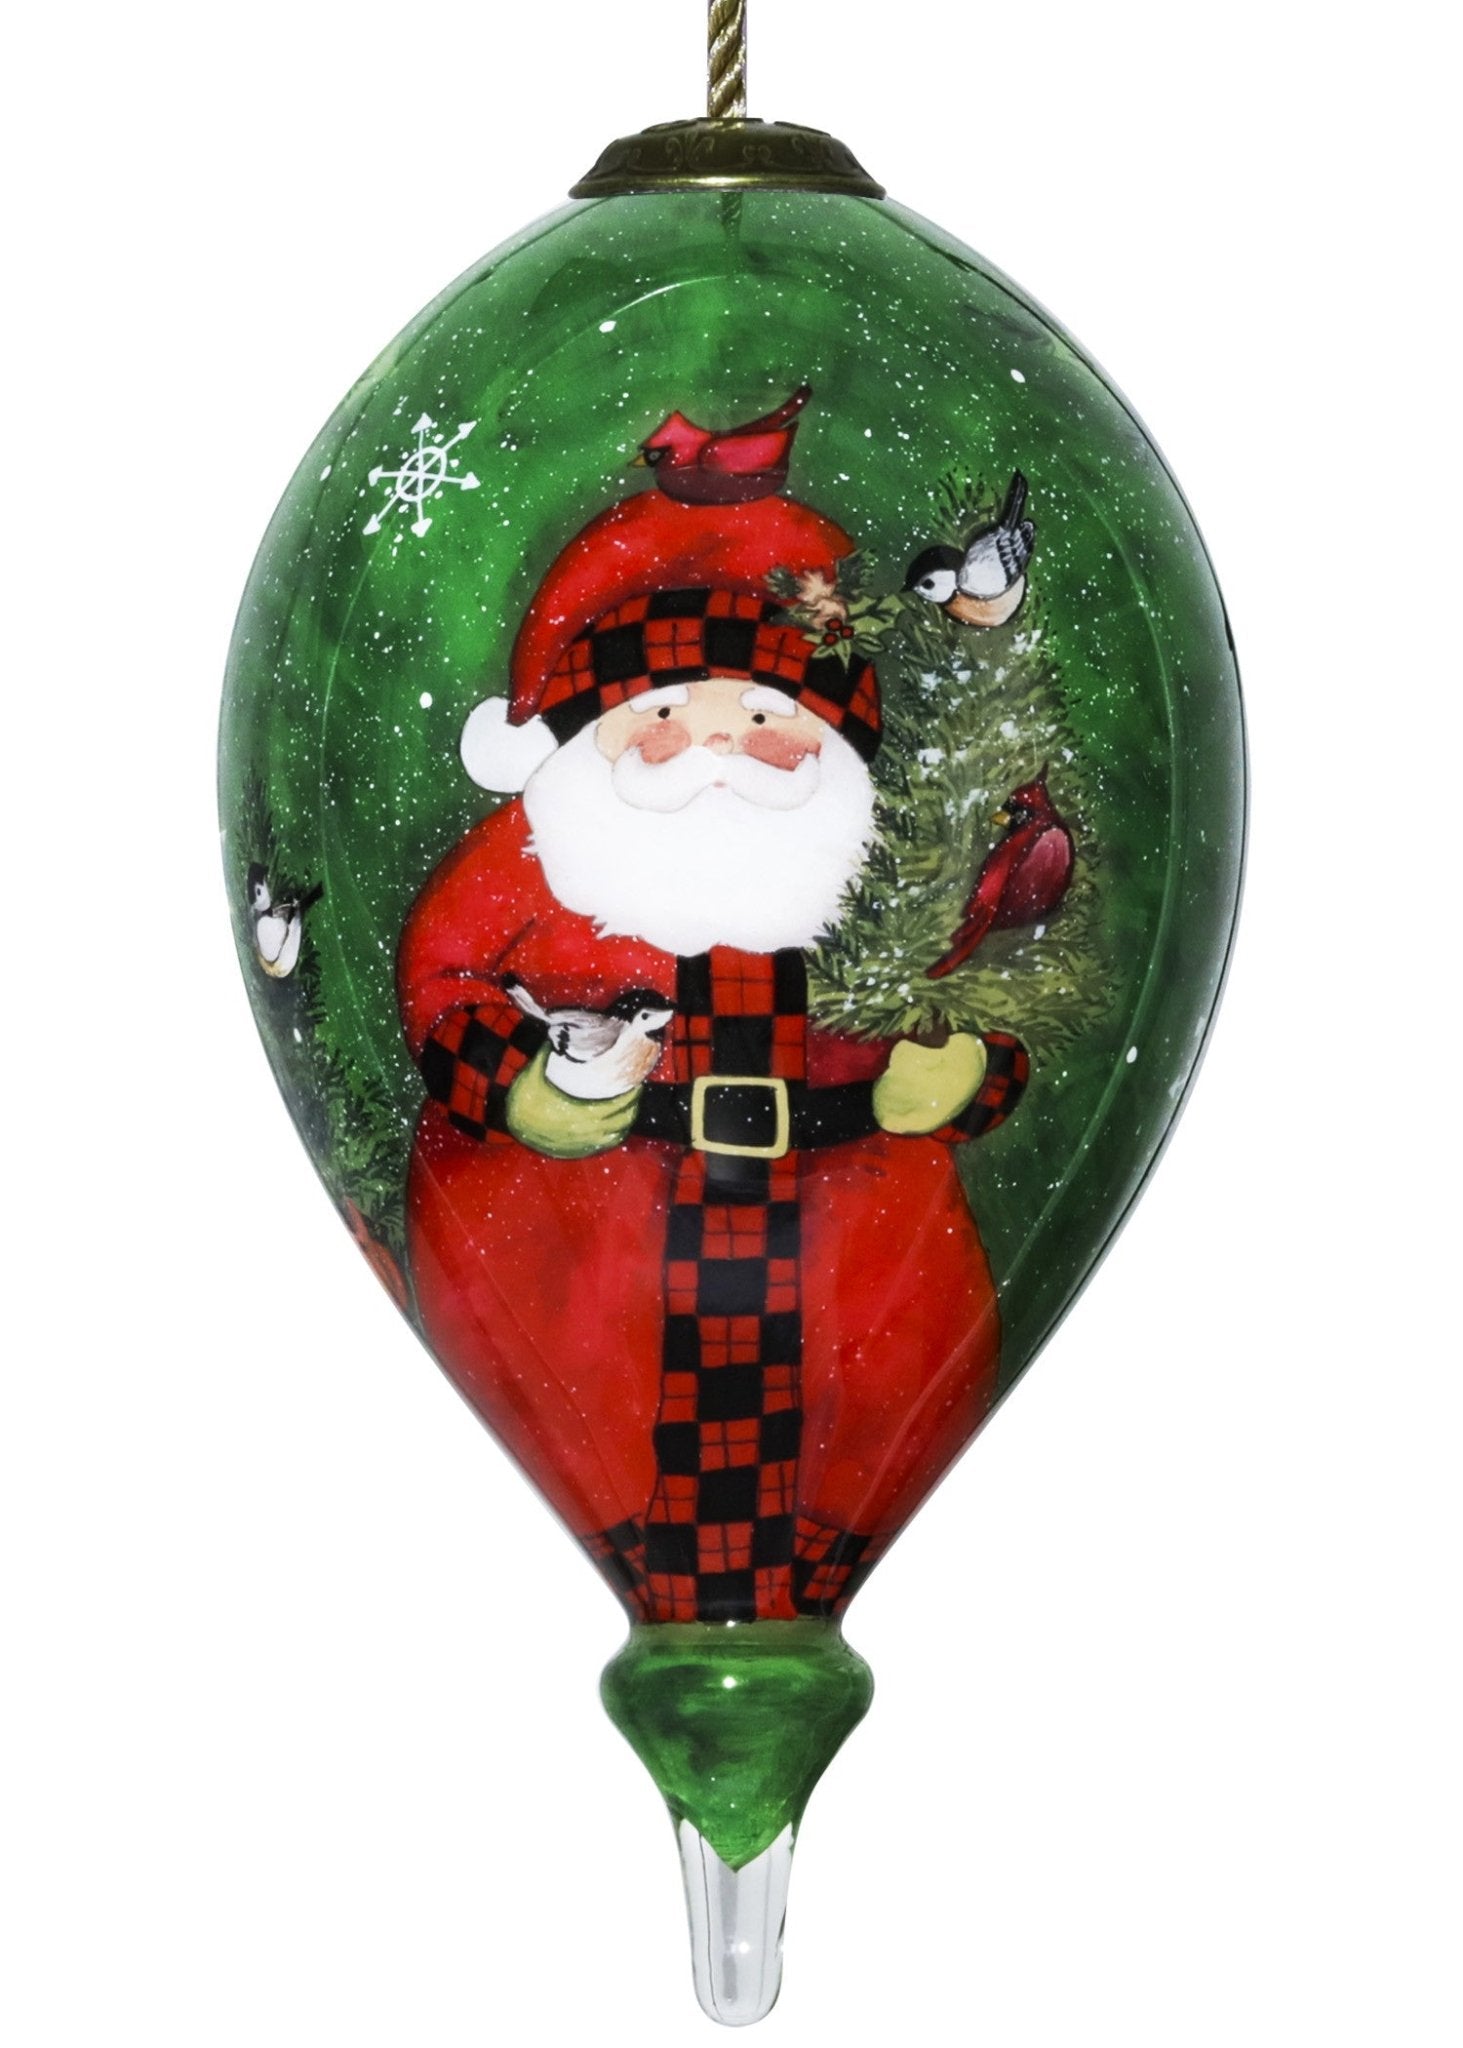 Green-Plaid-Santa-Hand-Painted-Mouth-Blown-Glass-Ornament-Christmas-Ornaments